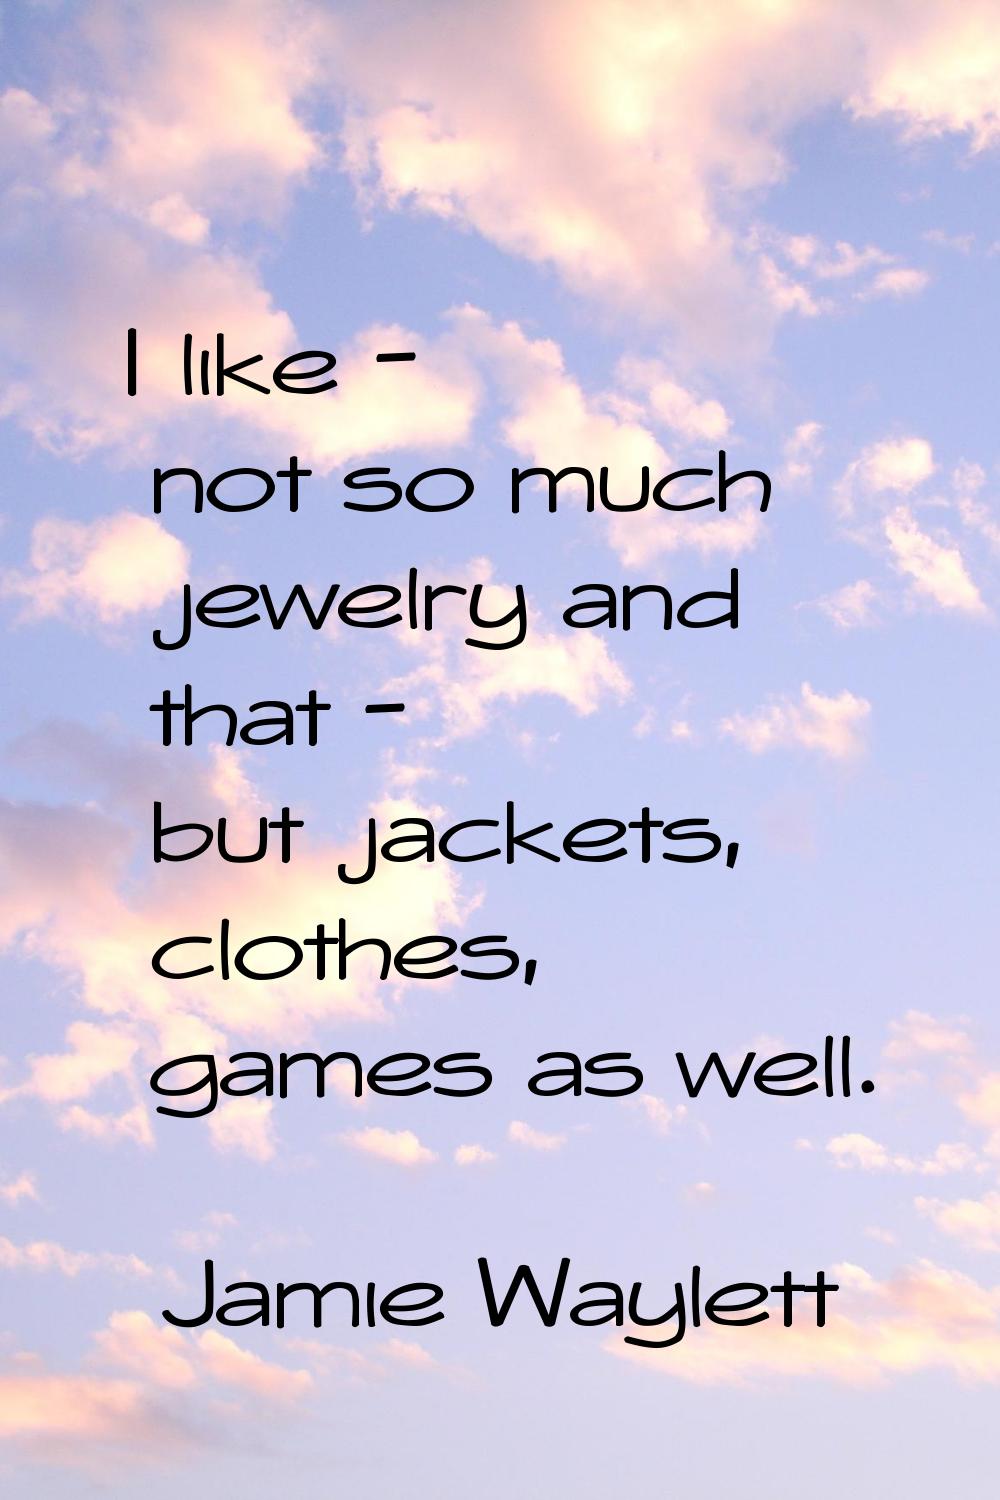 I like - not so much jewelry and that - but jackets, clothes, games as well.